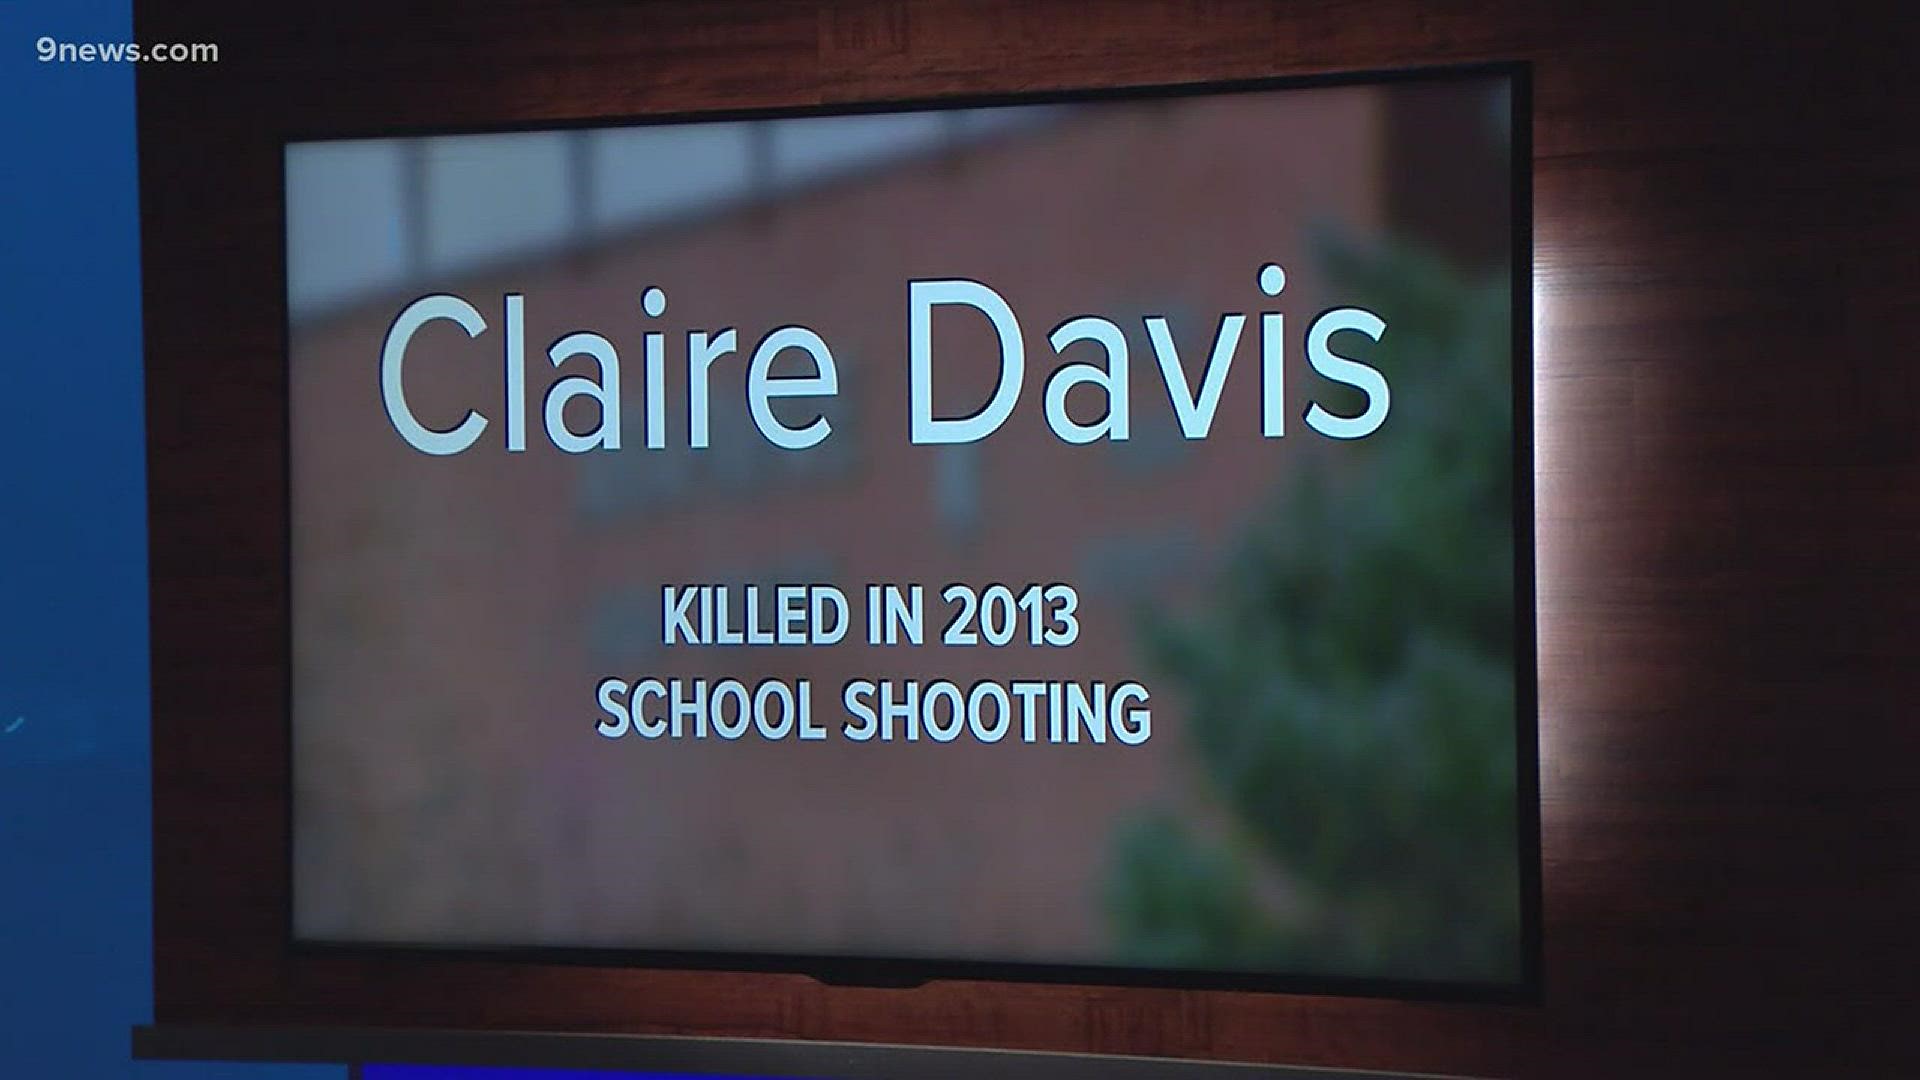 The Arapahoe High School Community Coalition claims there is an eroding school culture since the 2013 shooting of Claire Davis.